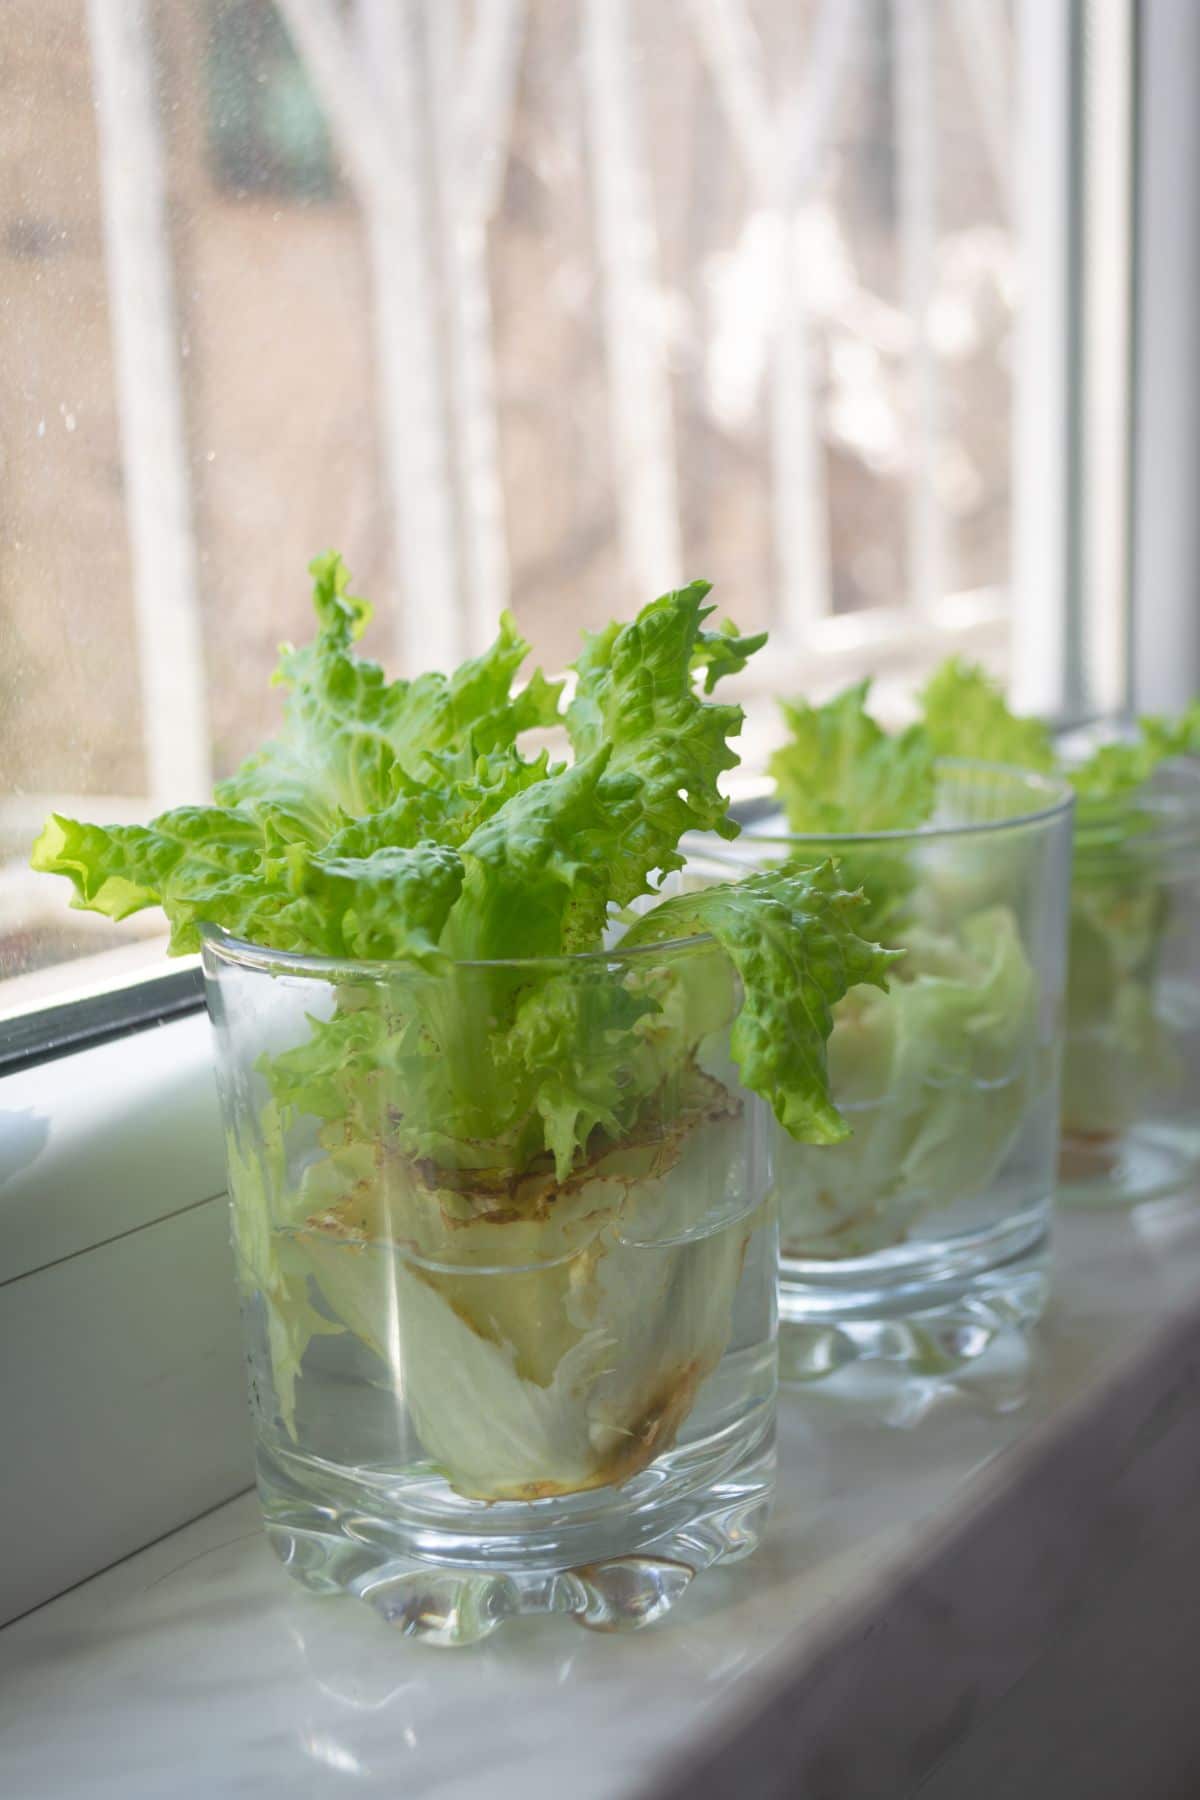 Lettuce bottoms set in water to regrow a second time